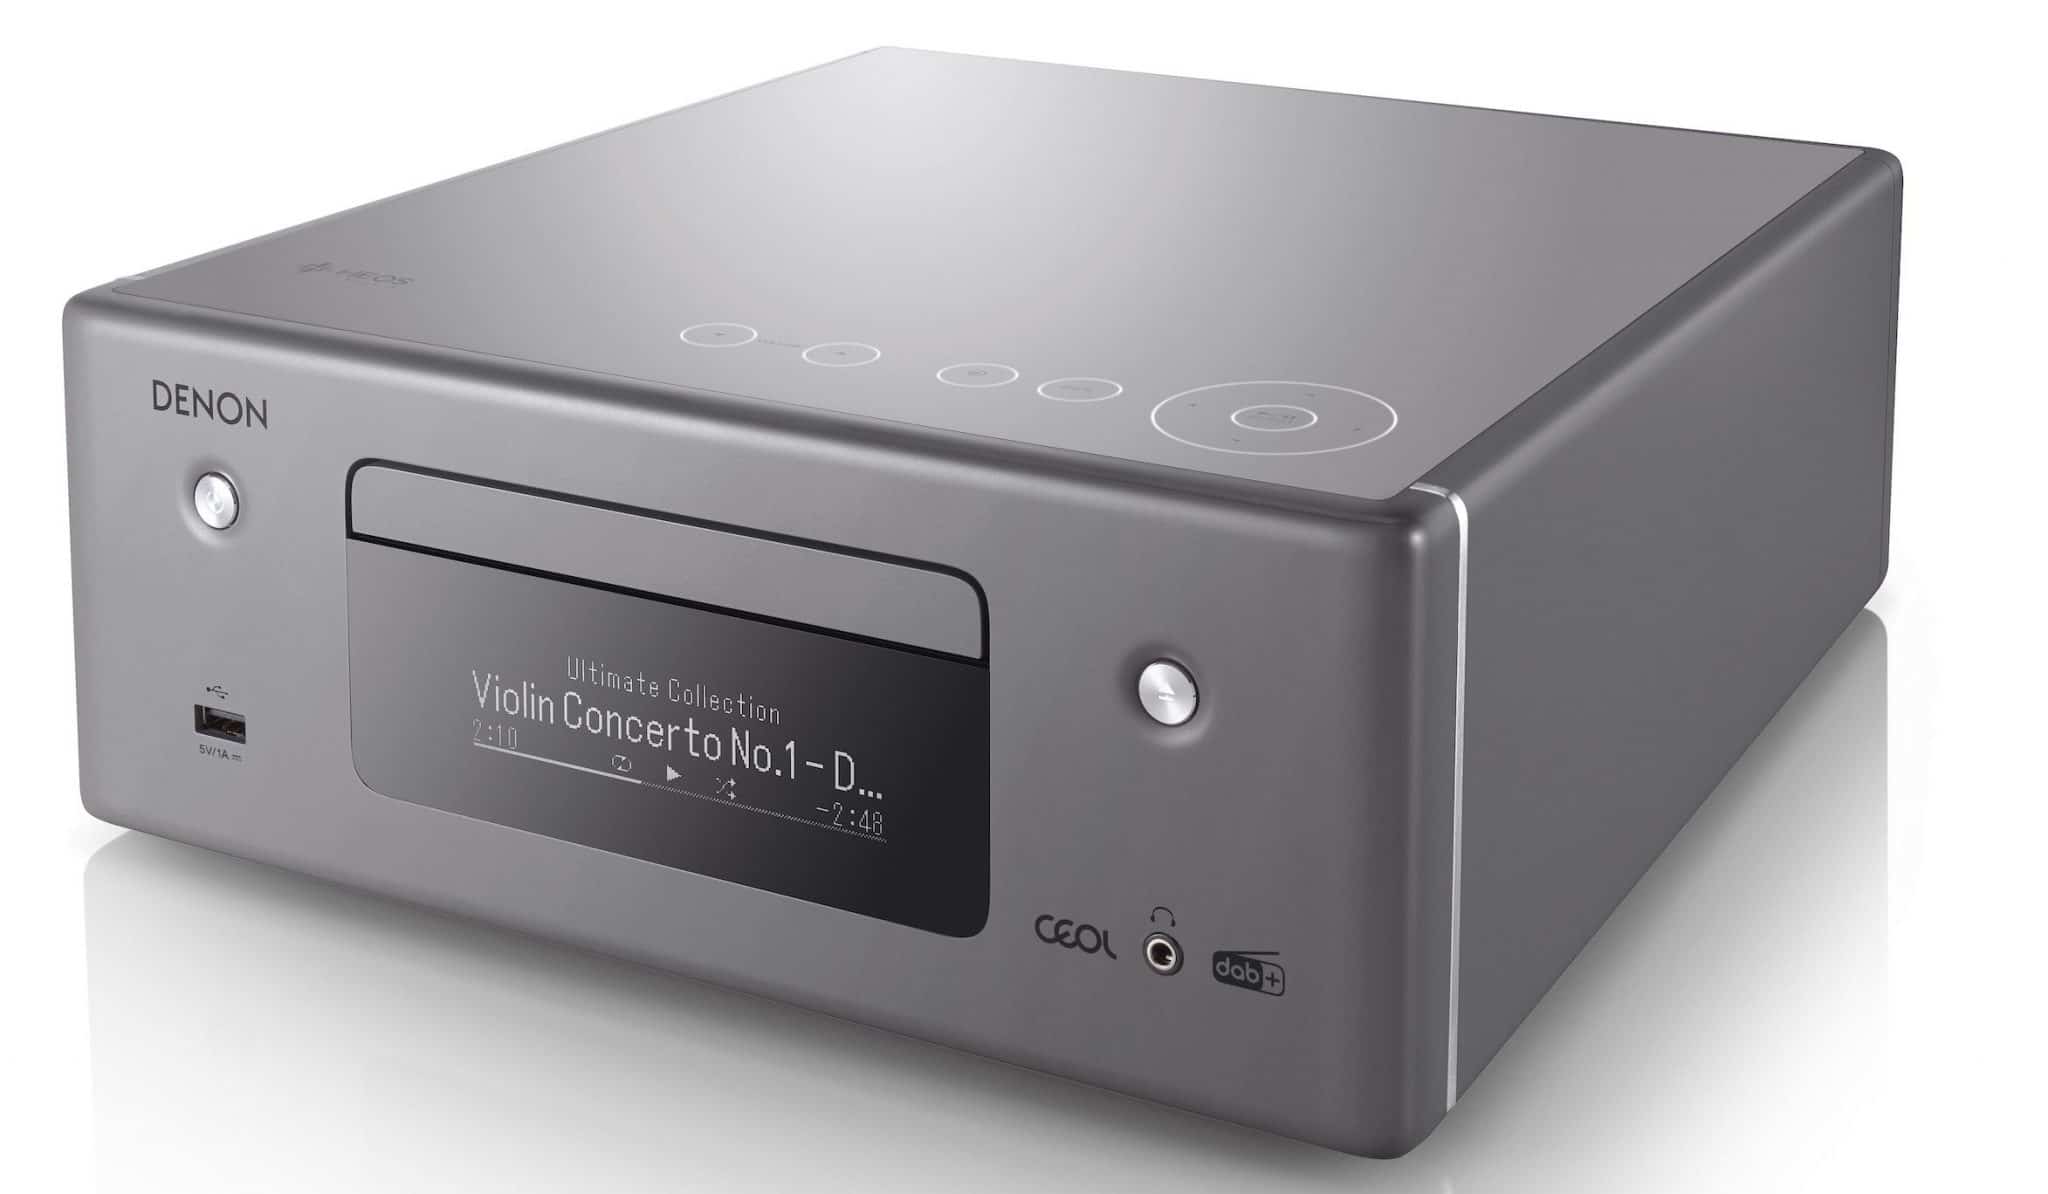 CEOL N11 DAB Network Music System From Denon